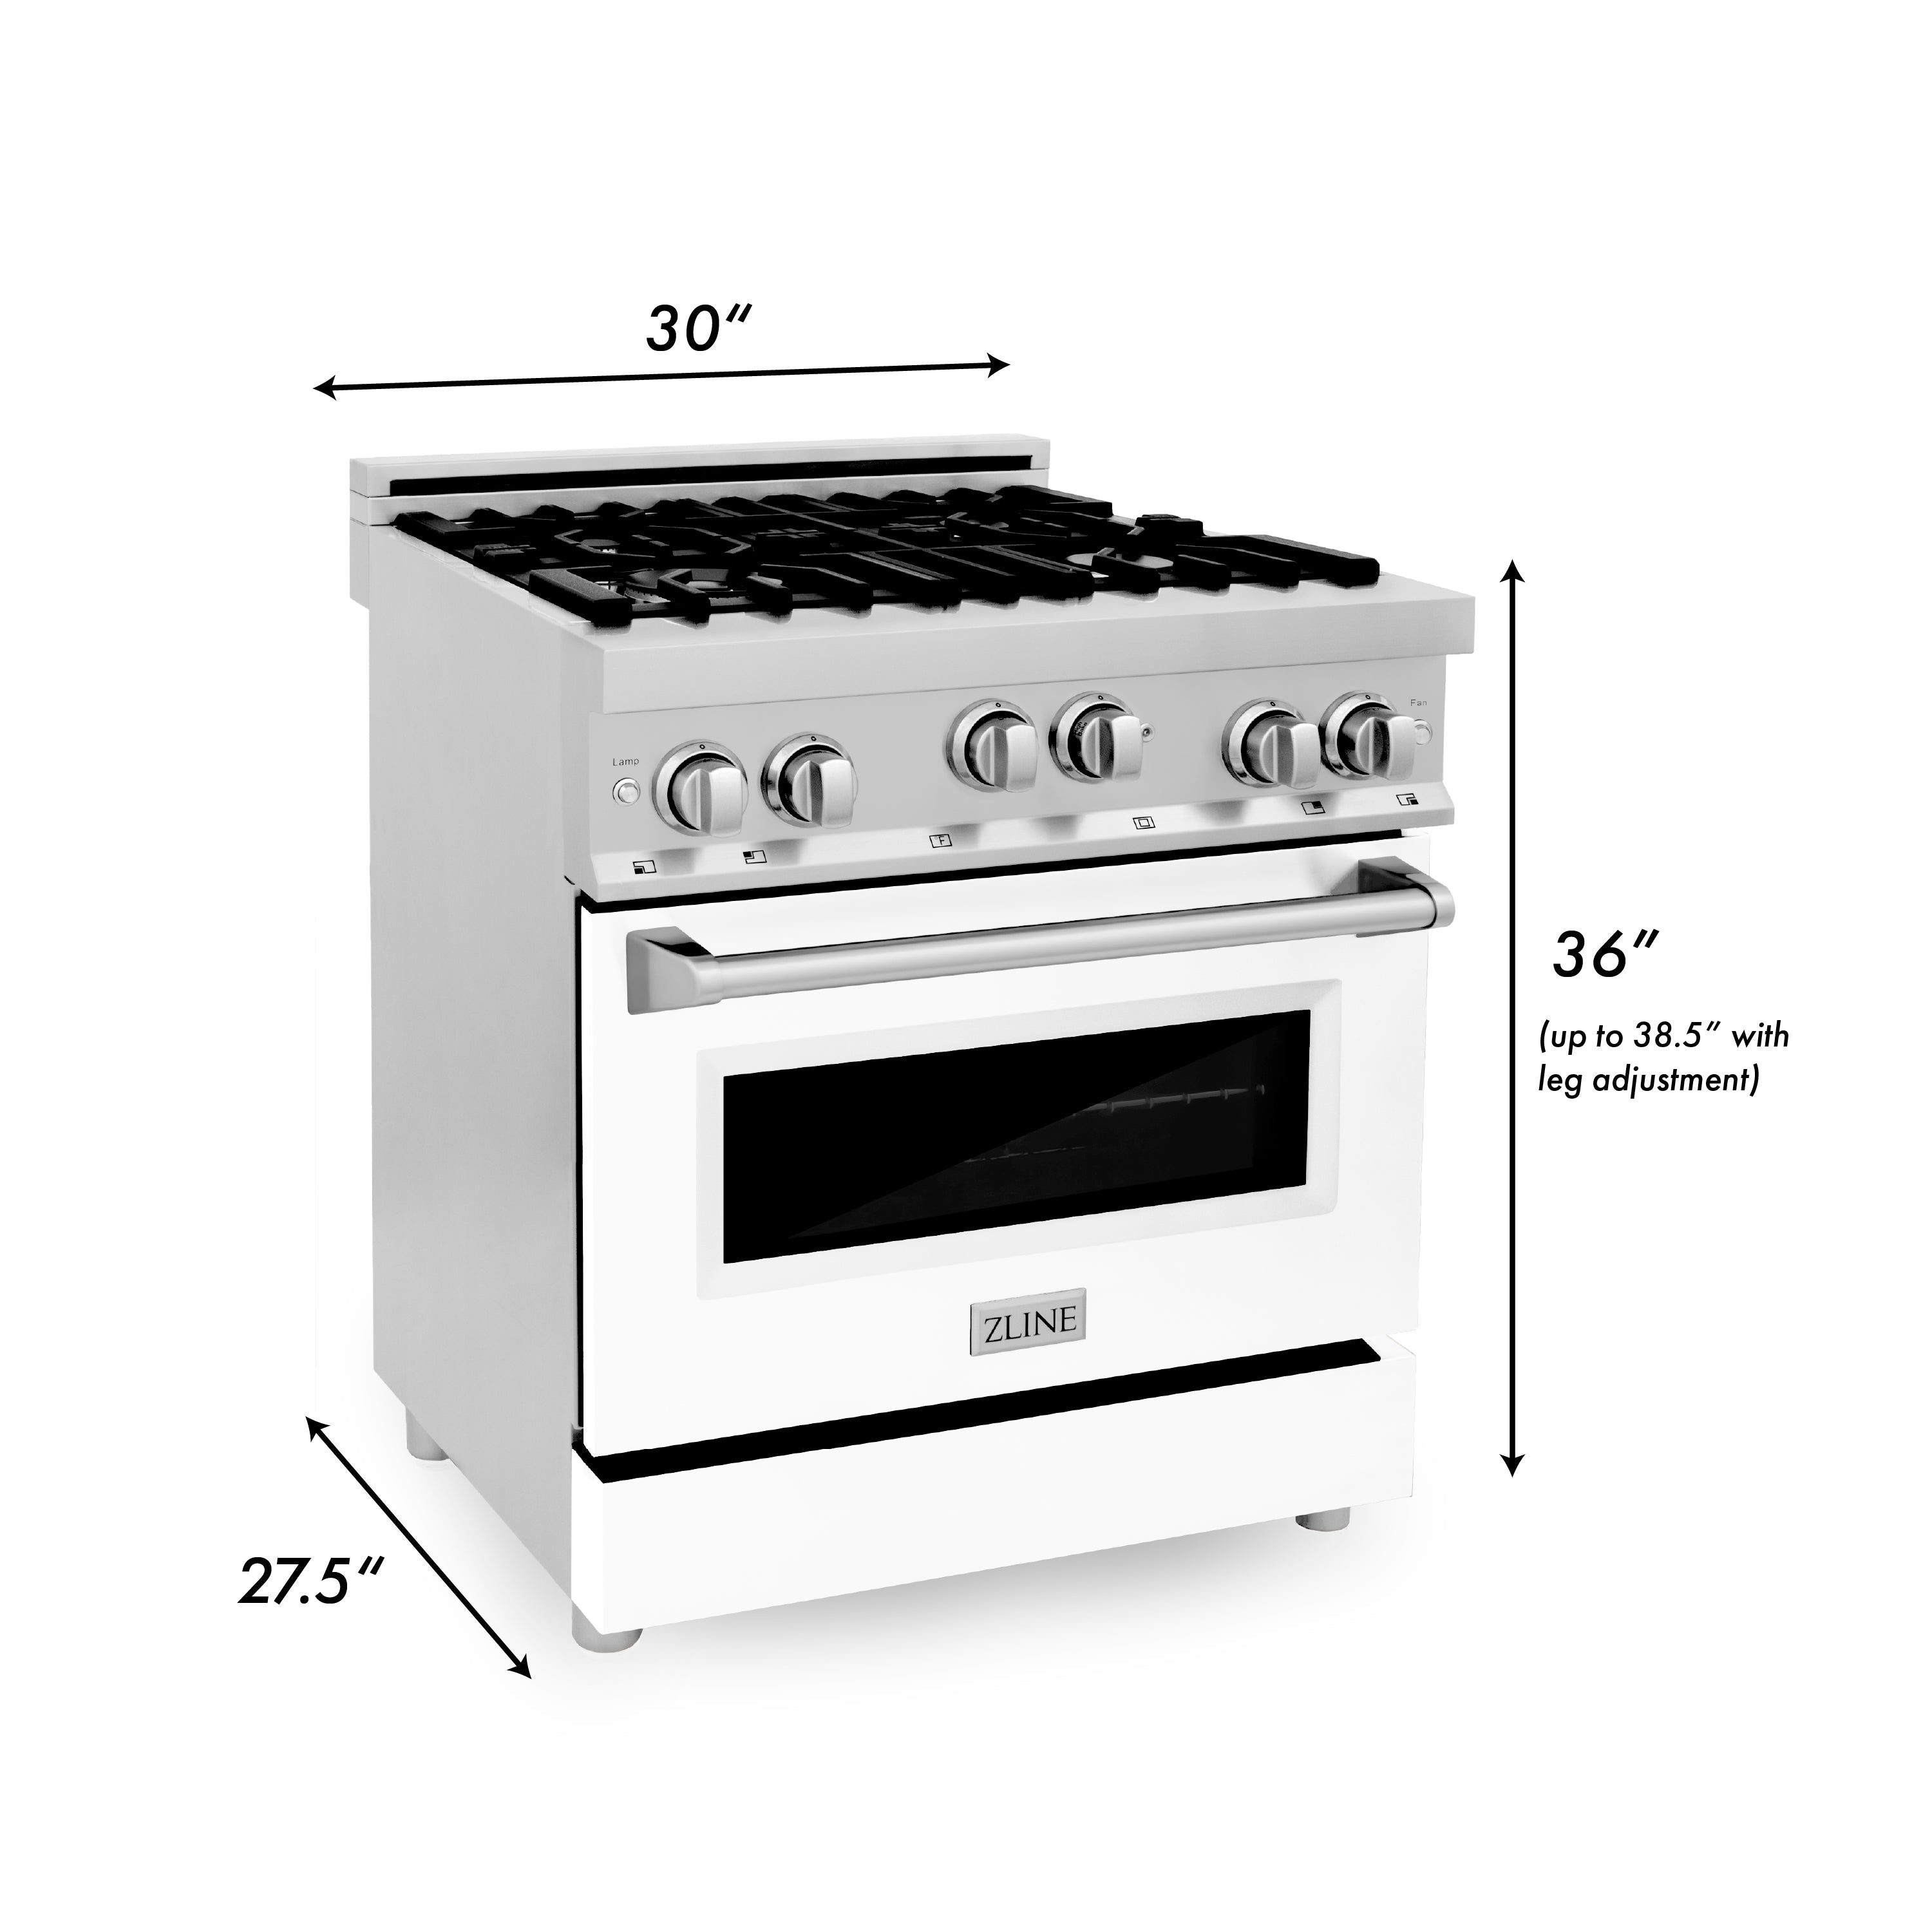 ZLINE 30 in. 4.0 cu. ft. Gas Oven and Gas Cooktop Range with Griddle and White Matte Door in Stainless Steel (RG-WM-GR-30)